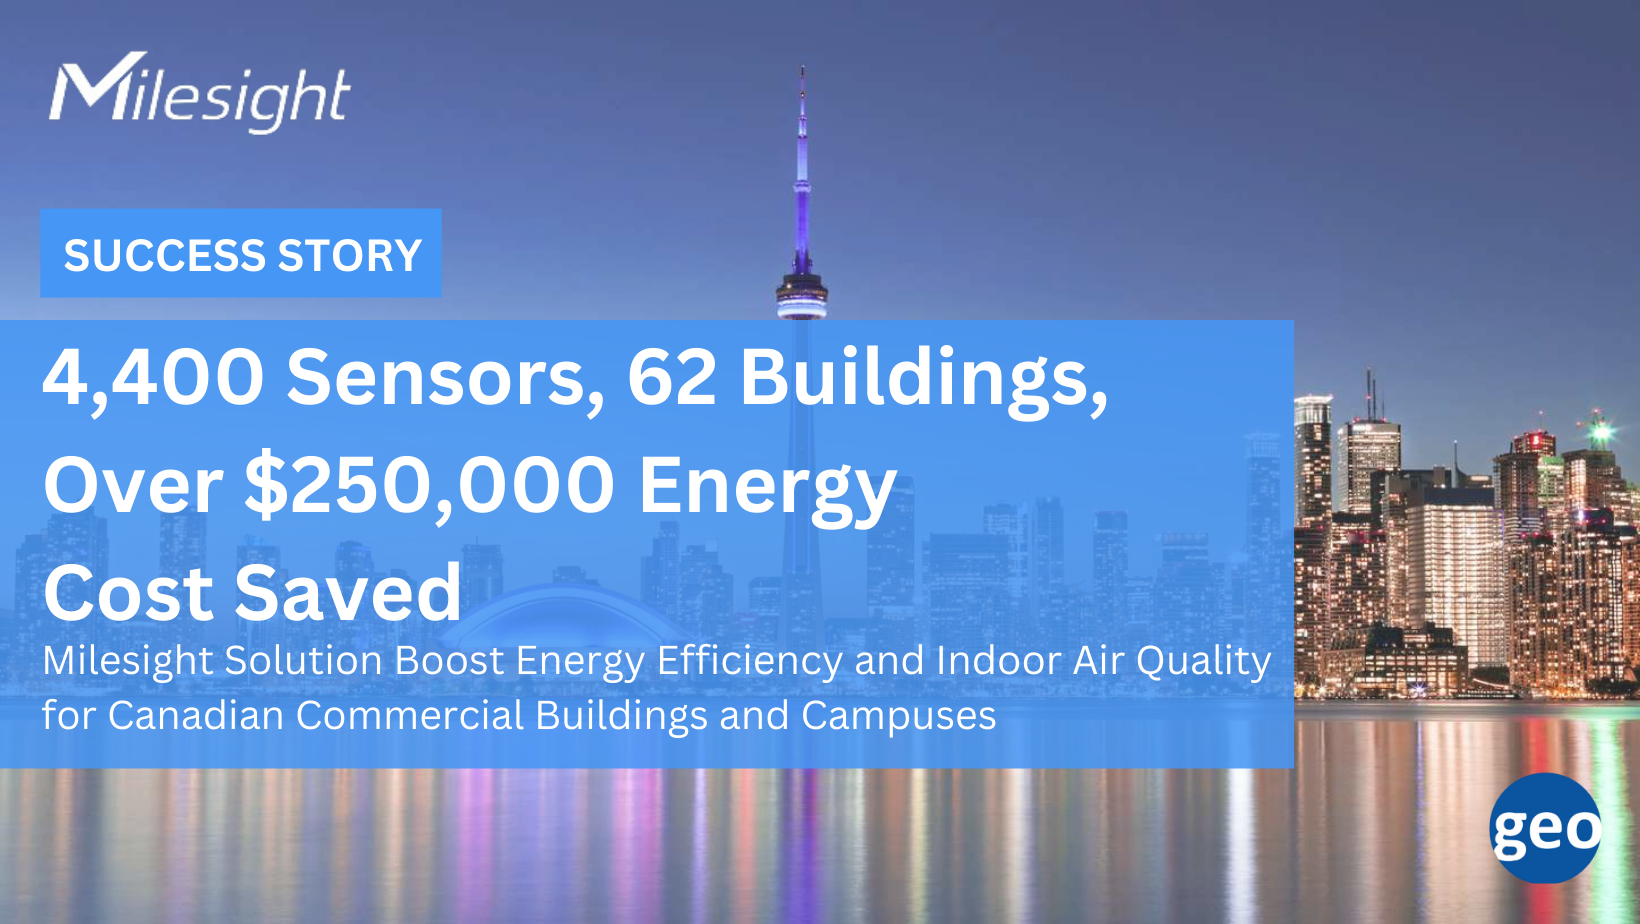 Milesight IoT: Success Story 4,400 Sensors, 62 Buildings, Over $250,000 Energy Cost Saved